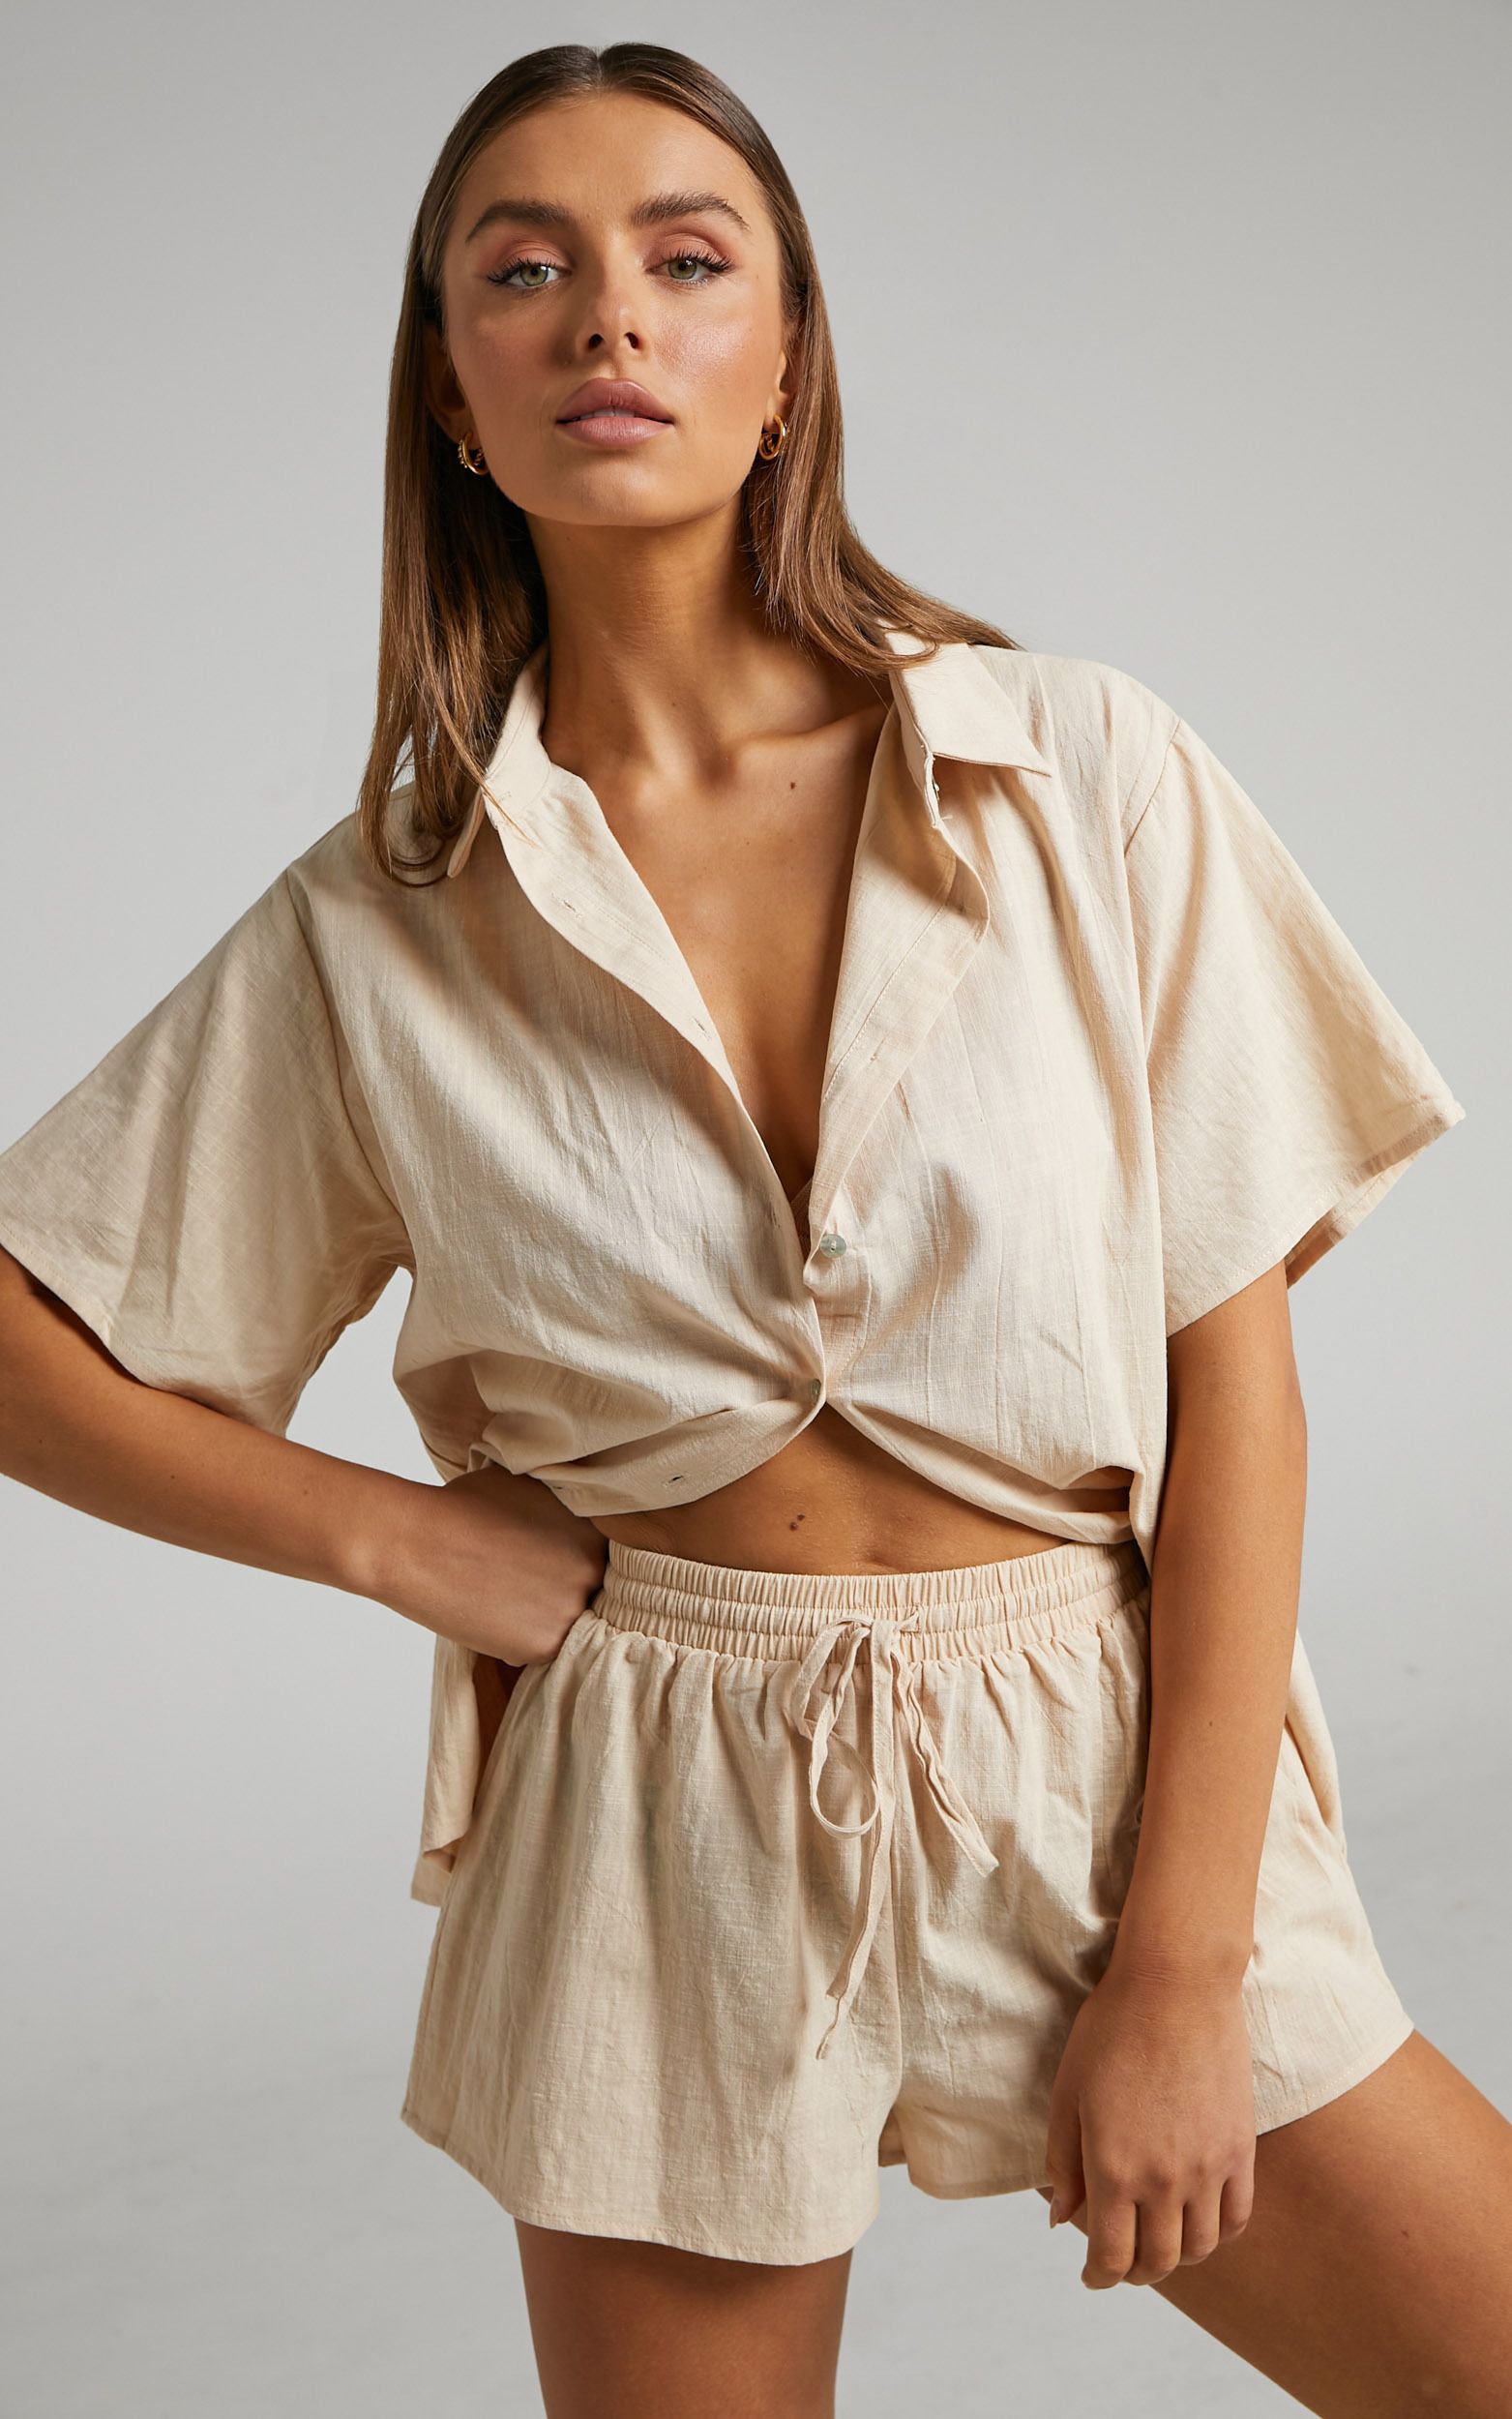 Vina del Mar Button Up Shirt and Shorts Two Piece Set in Oatmeal | Showpo (ANZ)